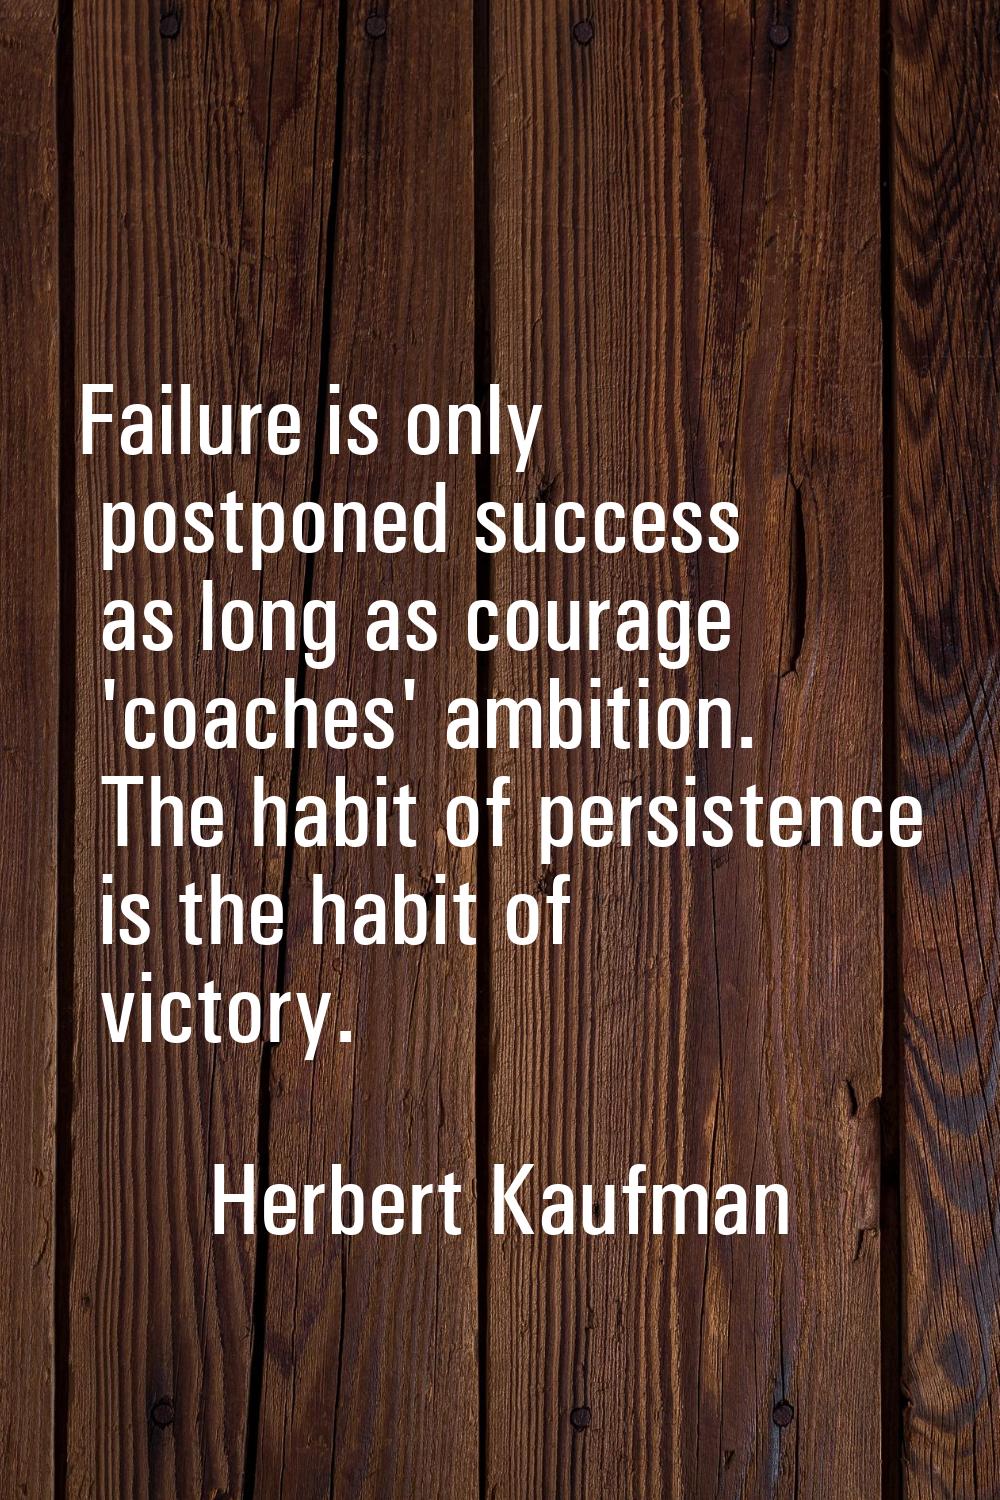 Failure is only postponed success as long as courage 'coaches' ambition. The habit of persistence i